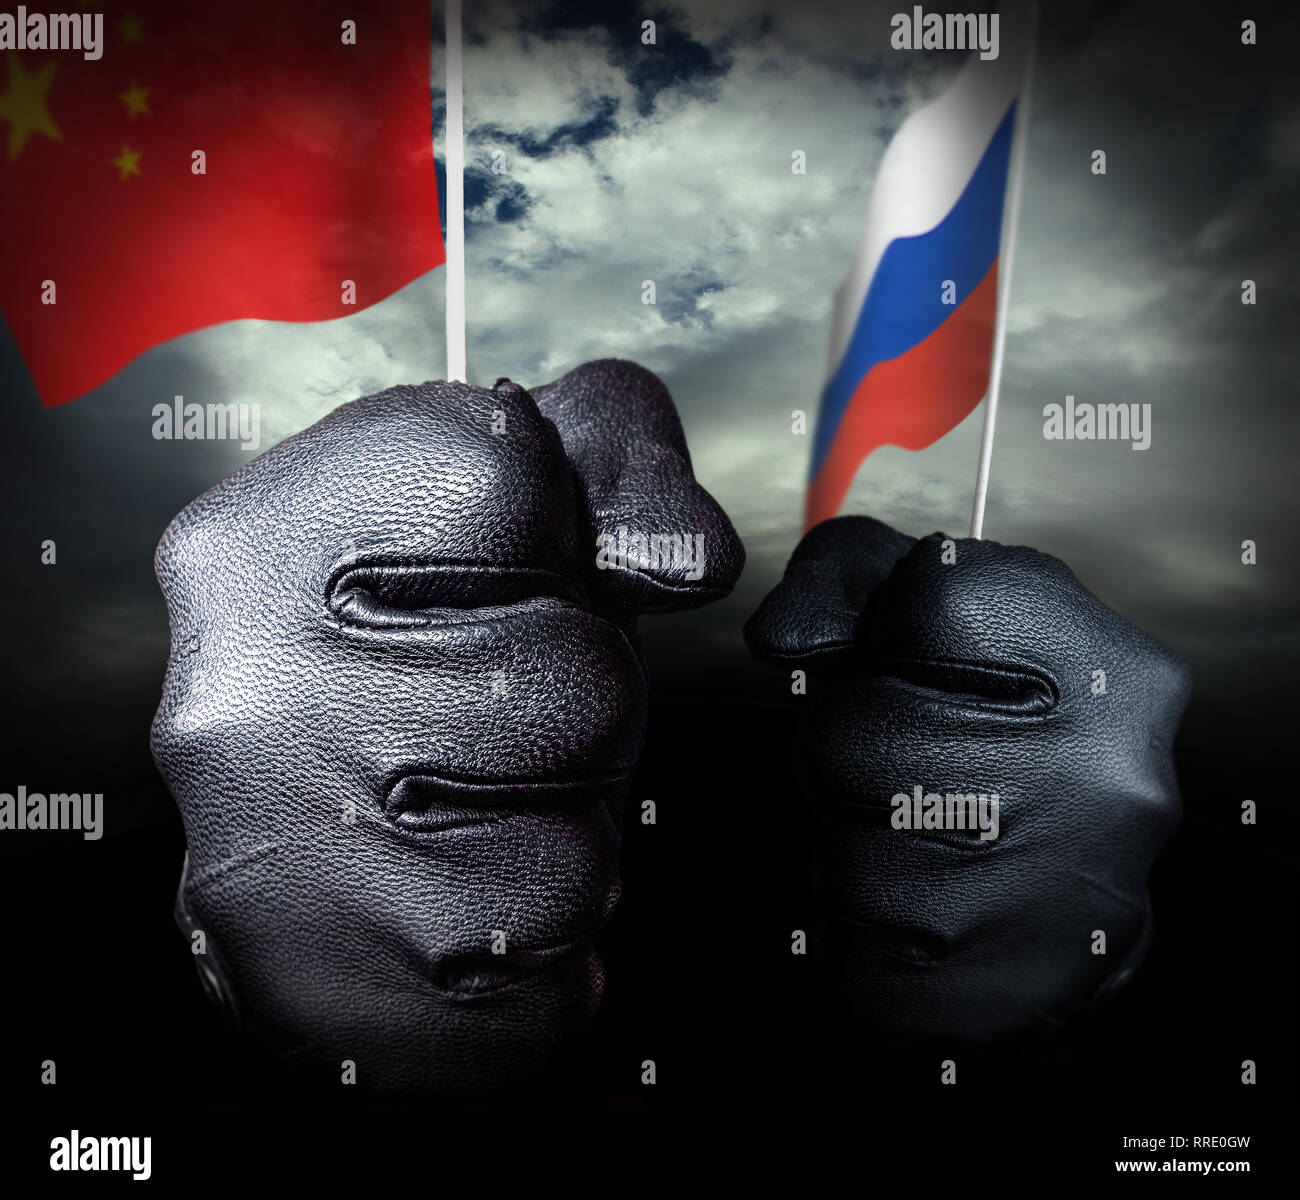 Two gloved hands arriving with flags, one Chinese the other Russian. In the background, the sky covers a black horizon. Stock Photo